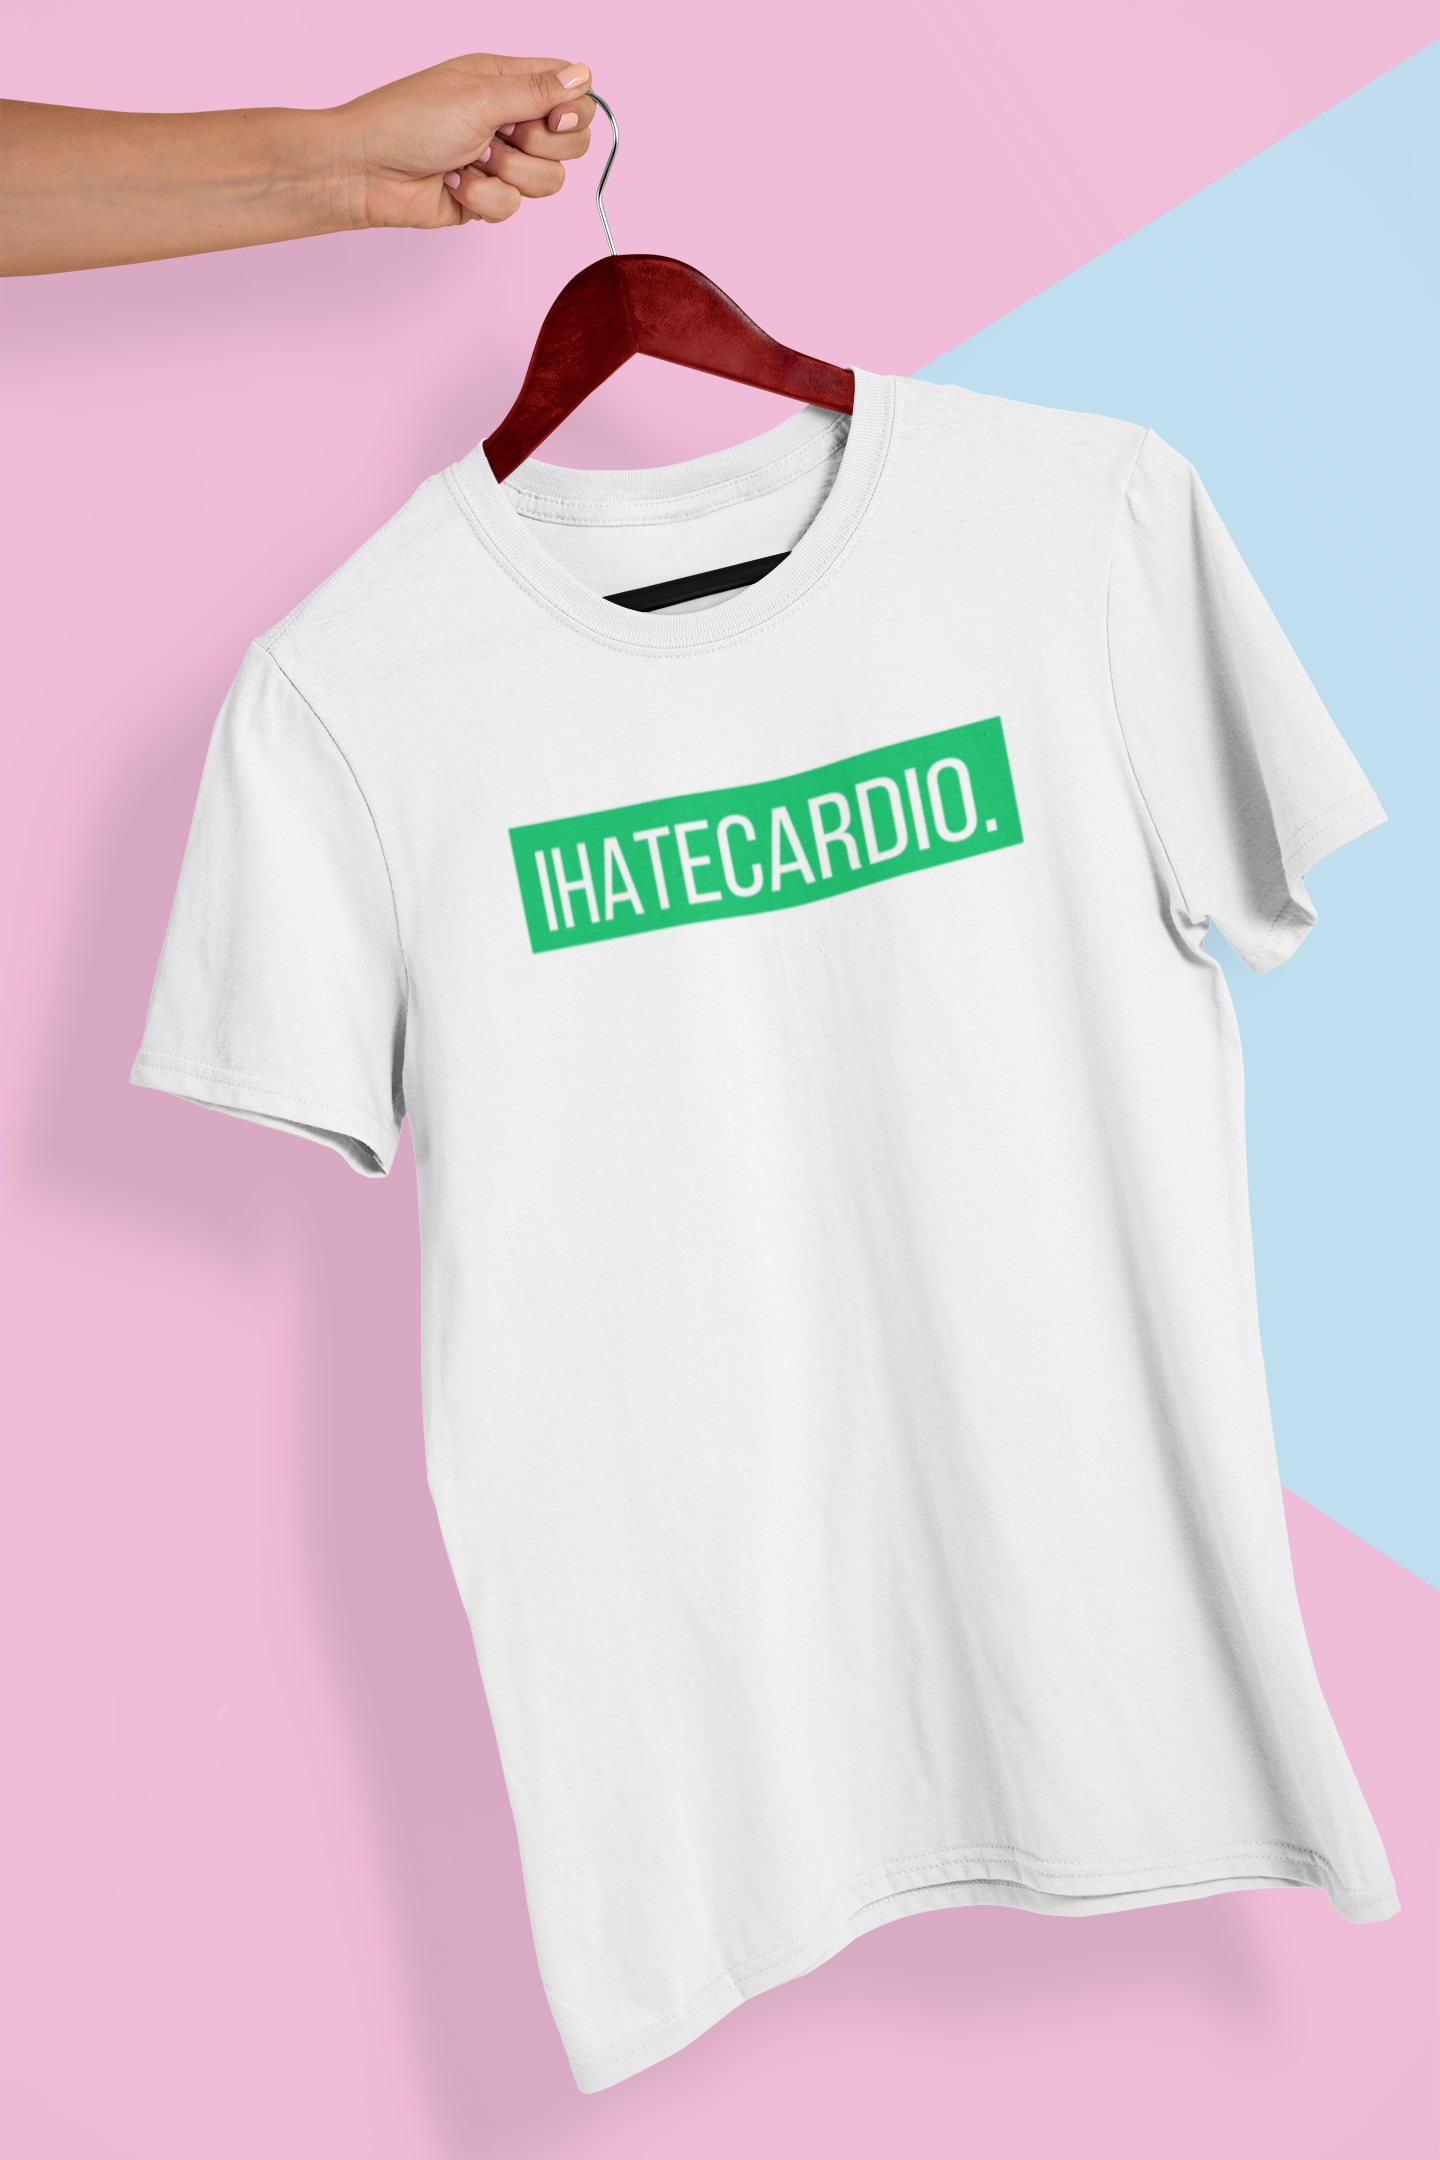 I Hate Cardio - Gym T Shirt Strong Soul Shirts & Tops